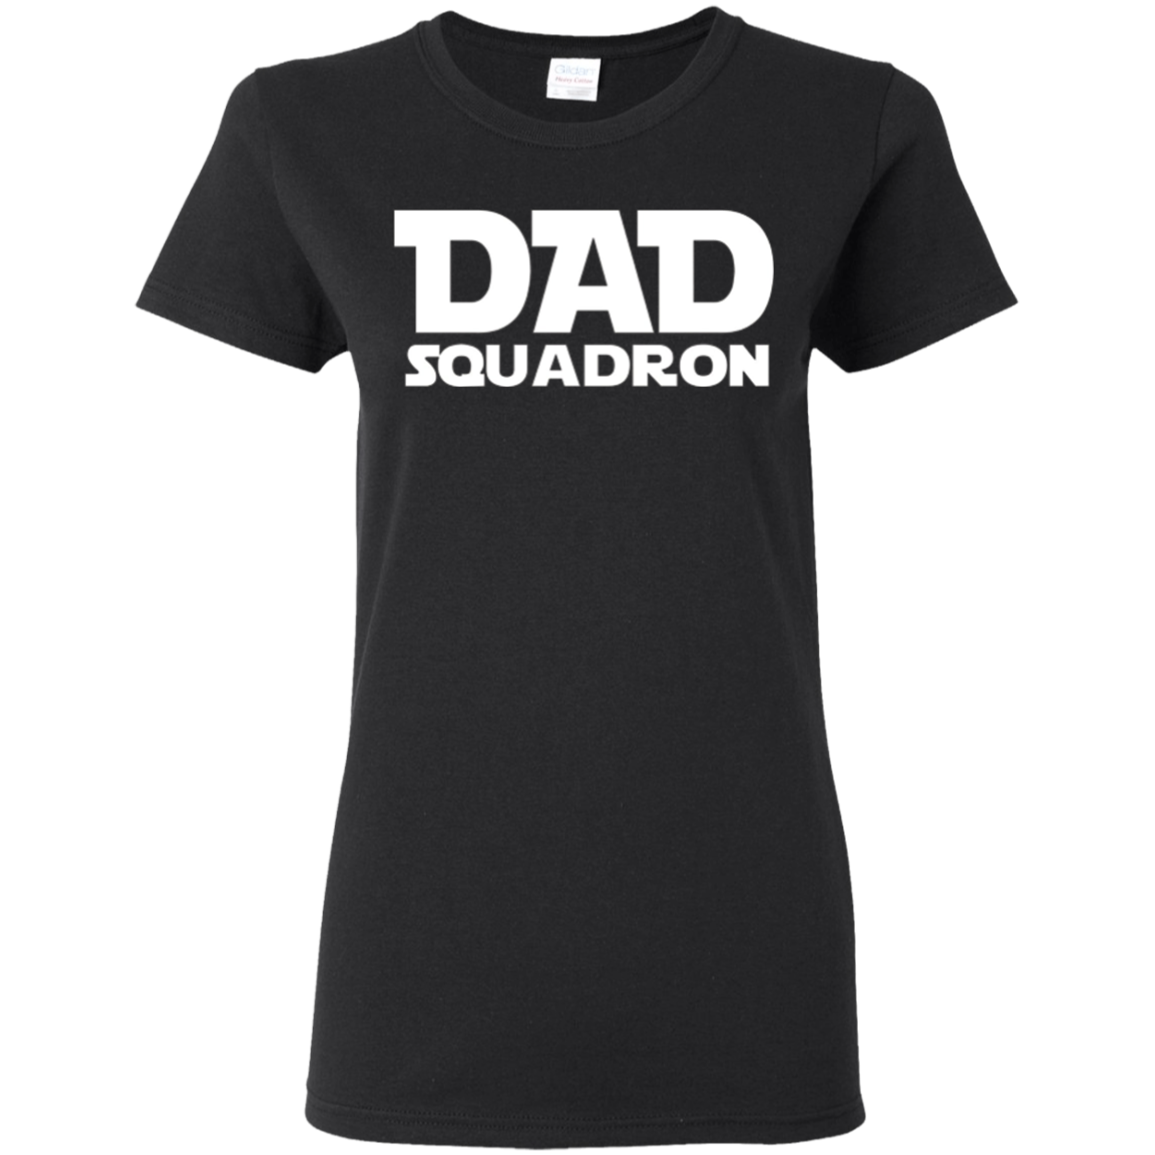 Find Funny Dad Squadron Nerdy Sci-fi Fan T-shirt For Fathers